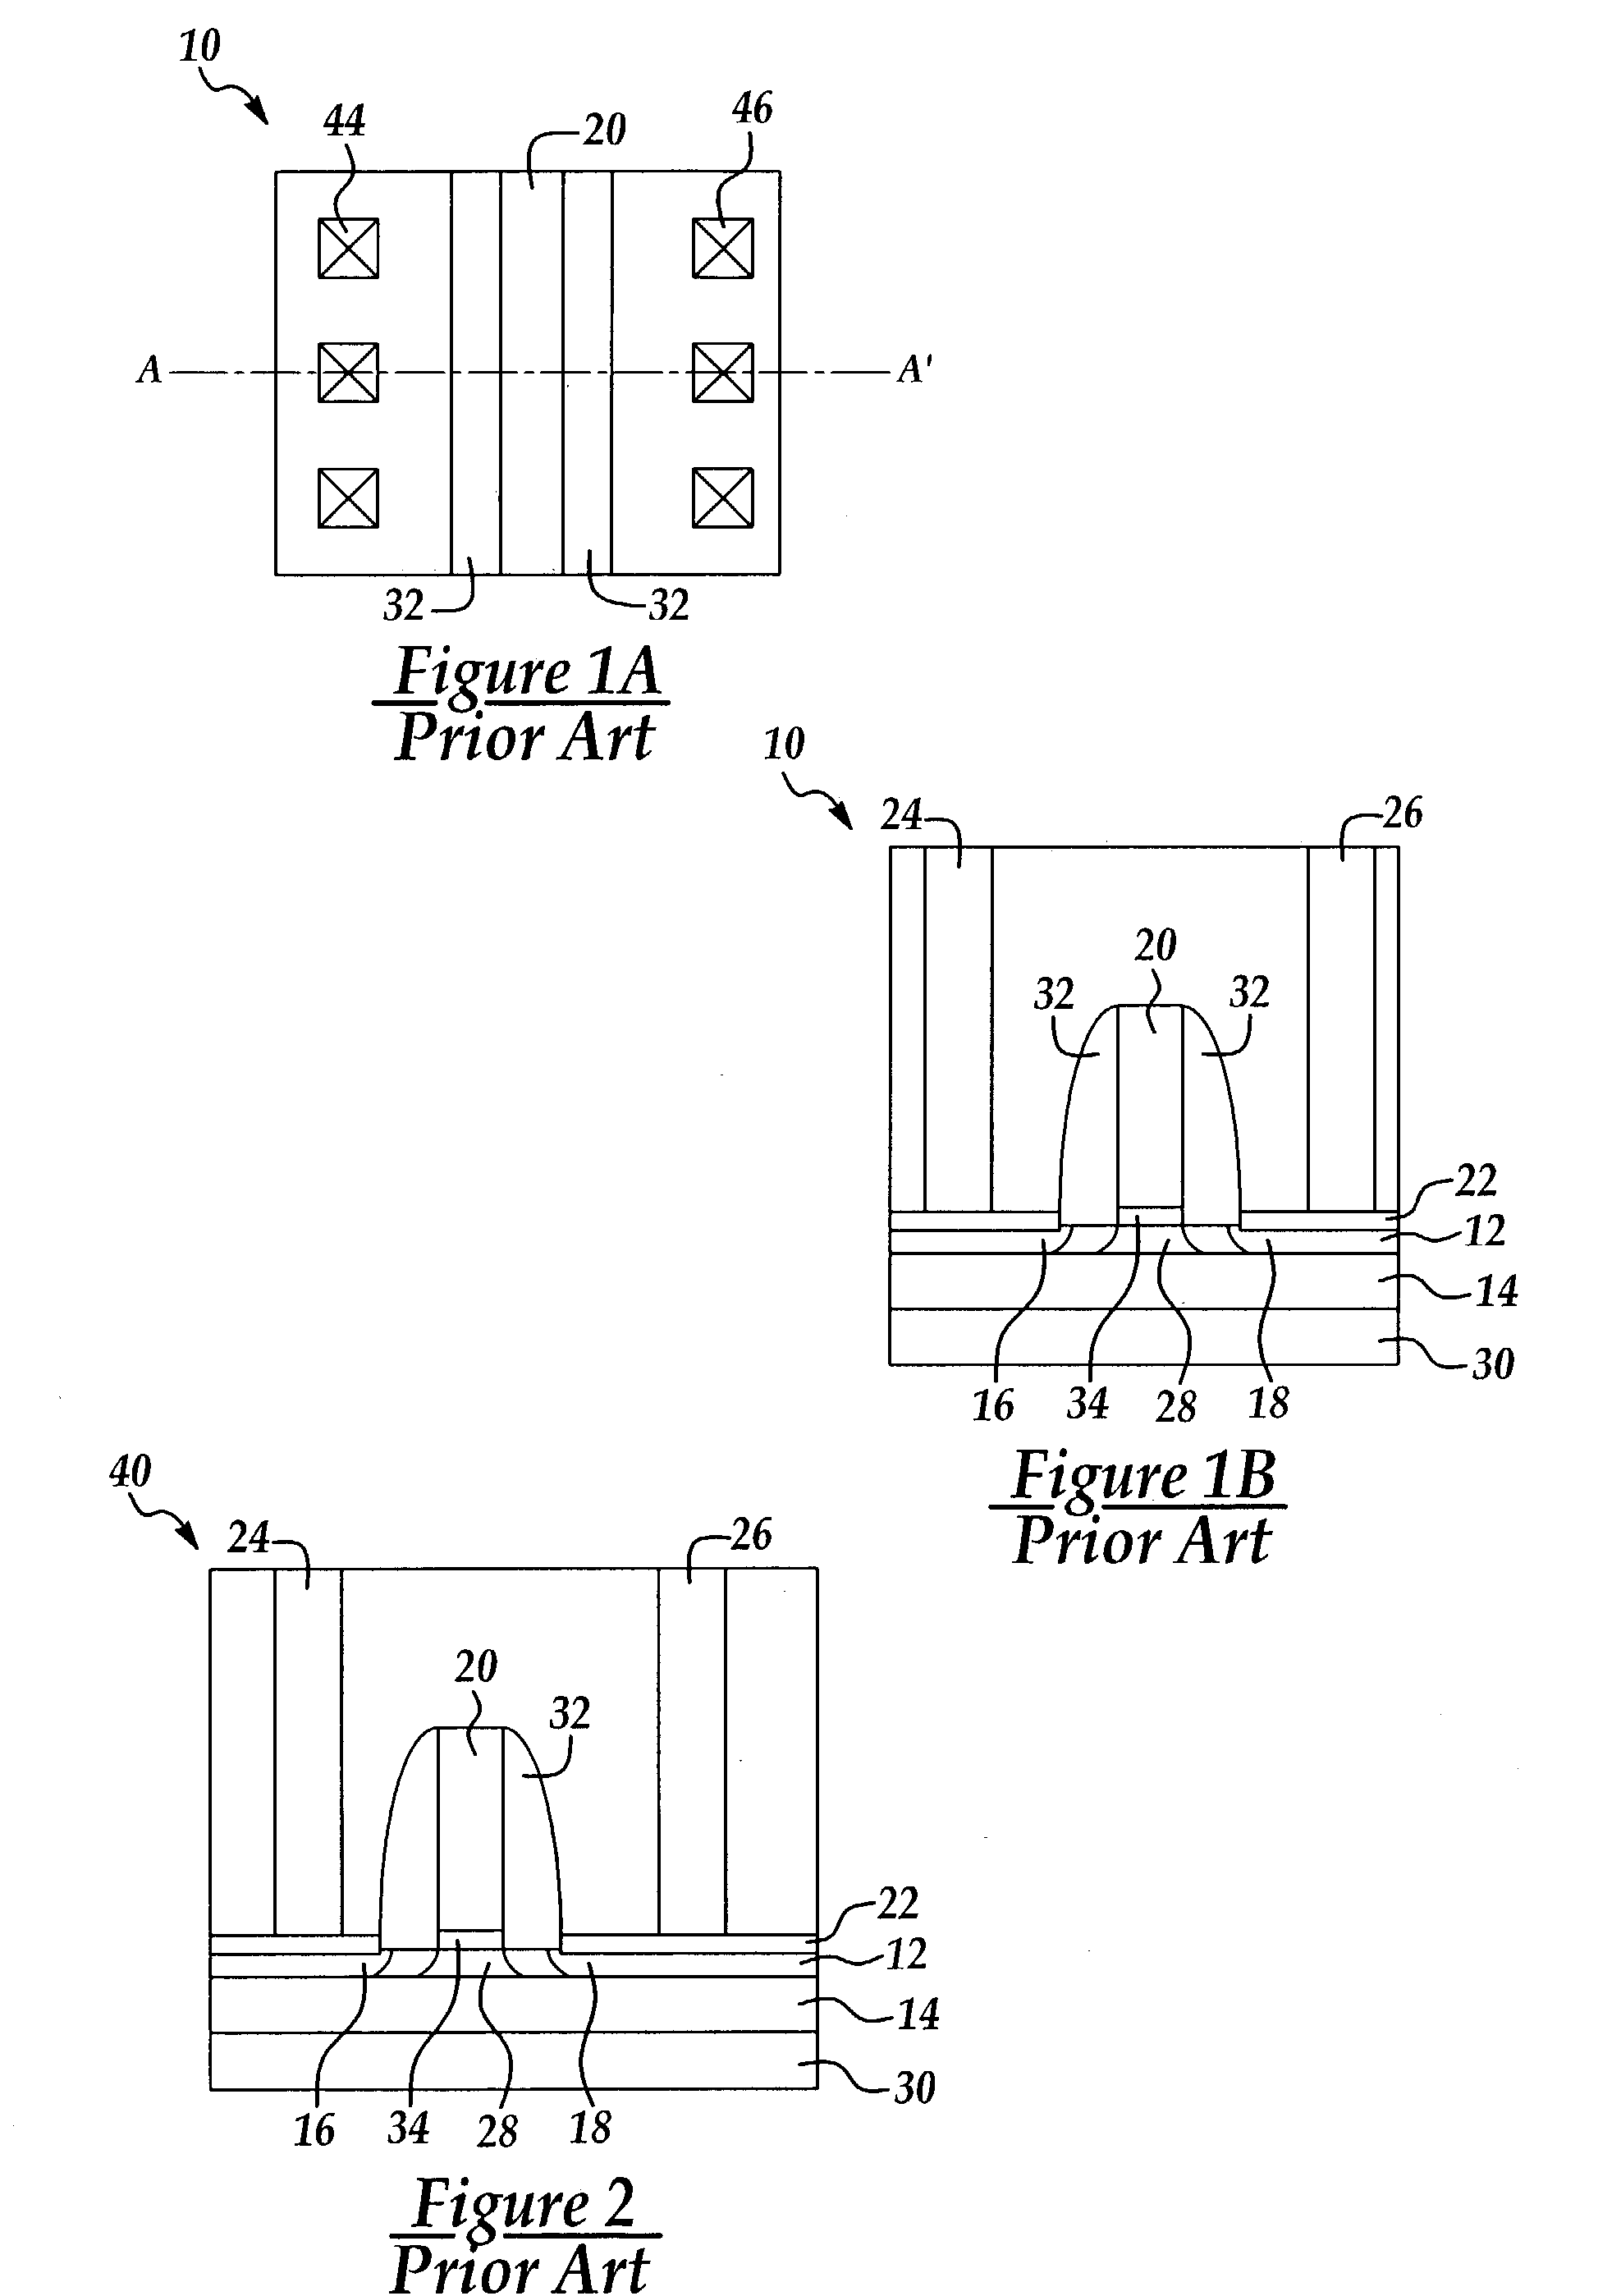 Self-aligned contact for silicon-on-insulator devices